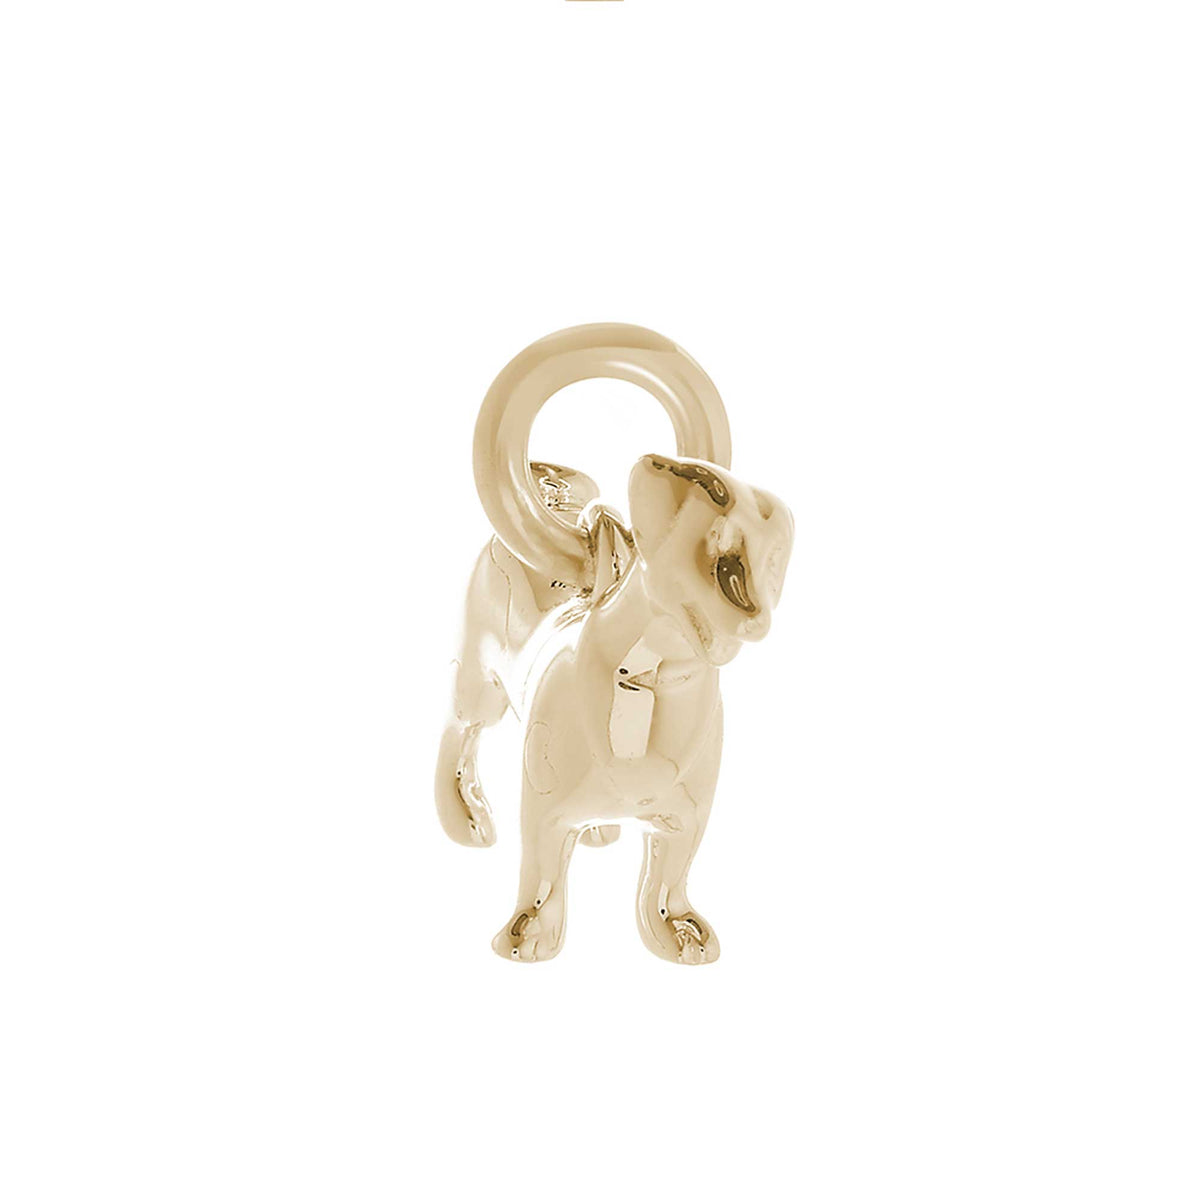 Solid 9ct gold Jack Russell Terrier charm with tiny bandana, perfect for a charm bracelet or necklace.